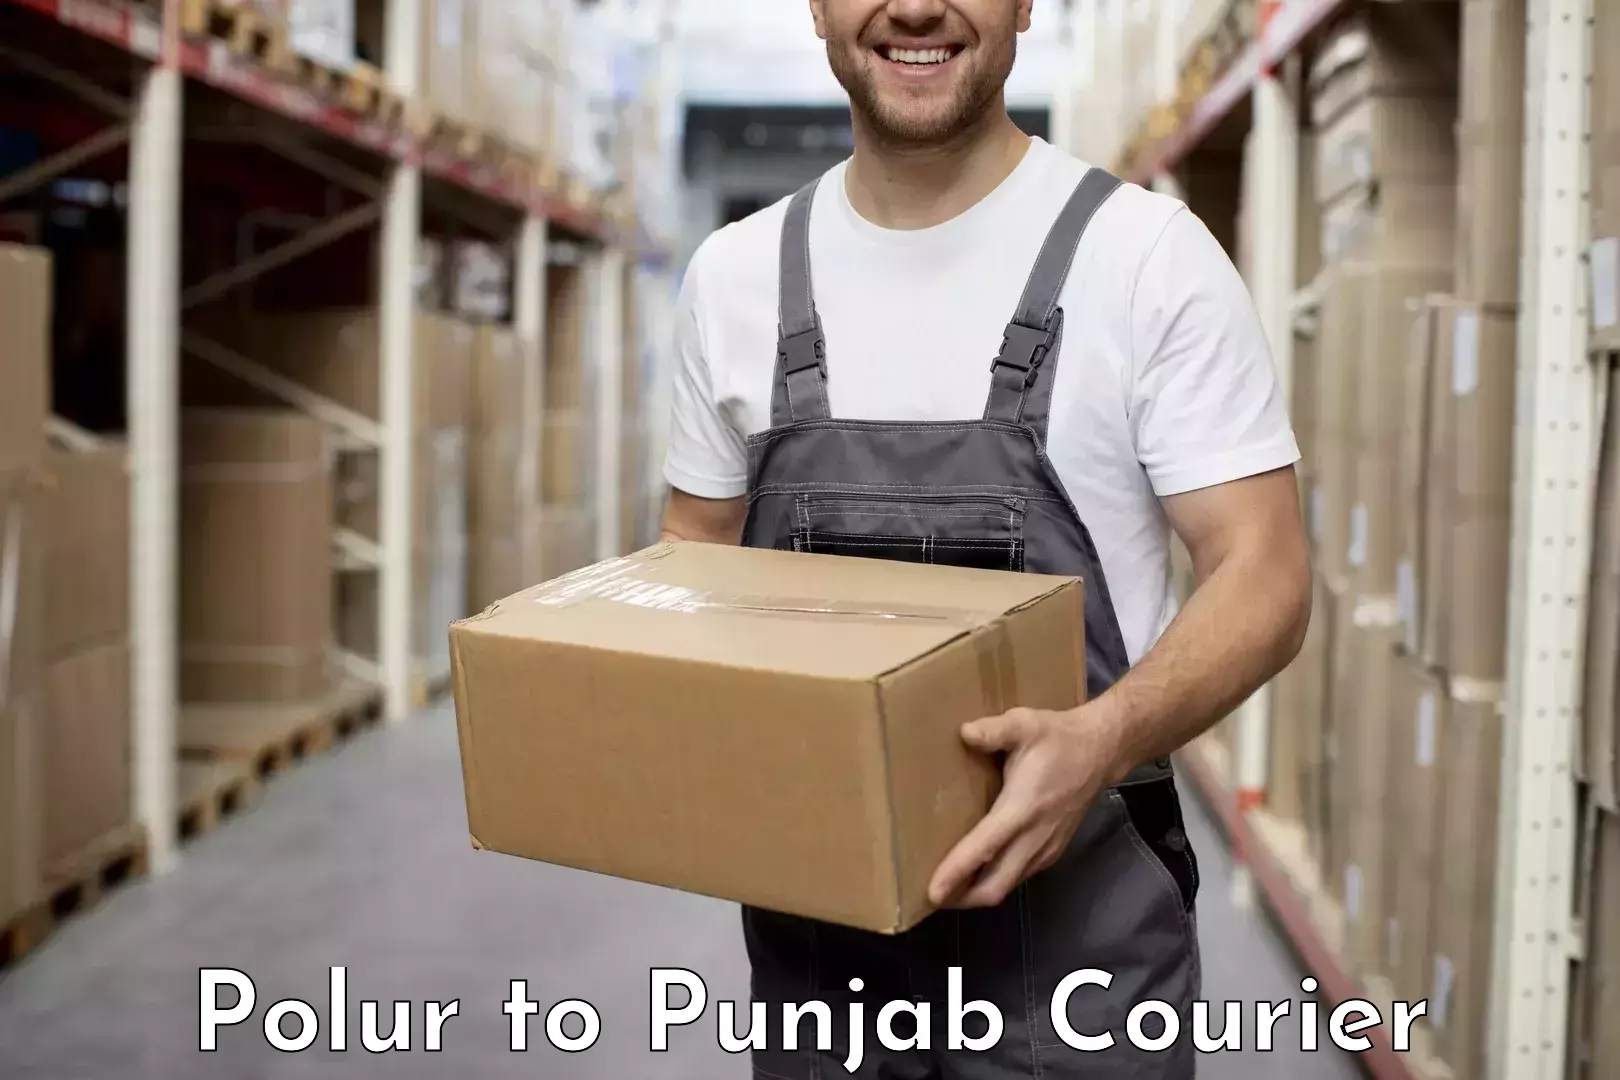 Same-day delivery solutions Polur to Punjab